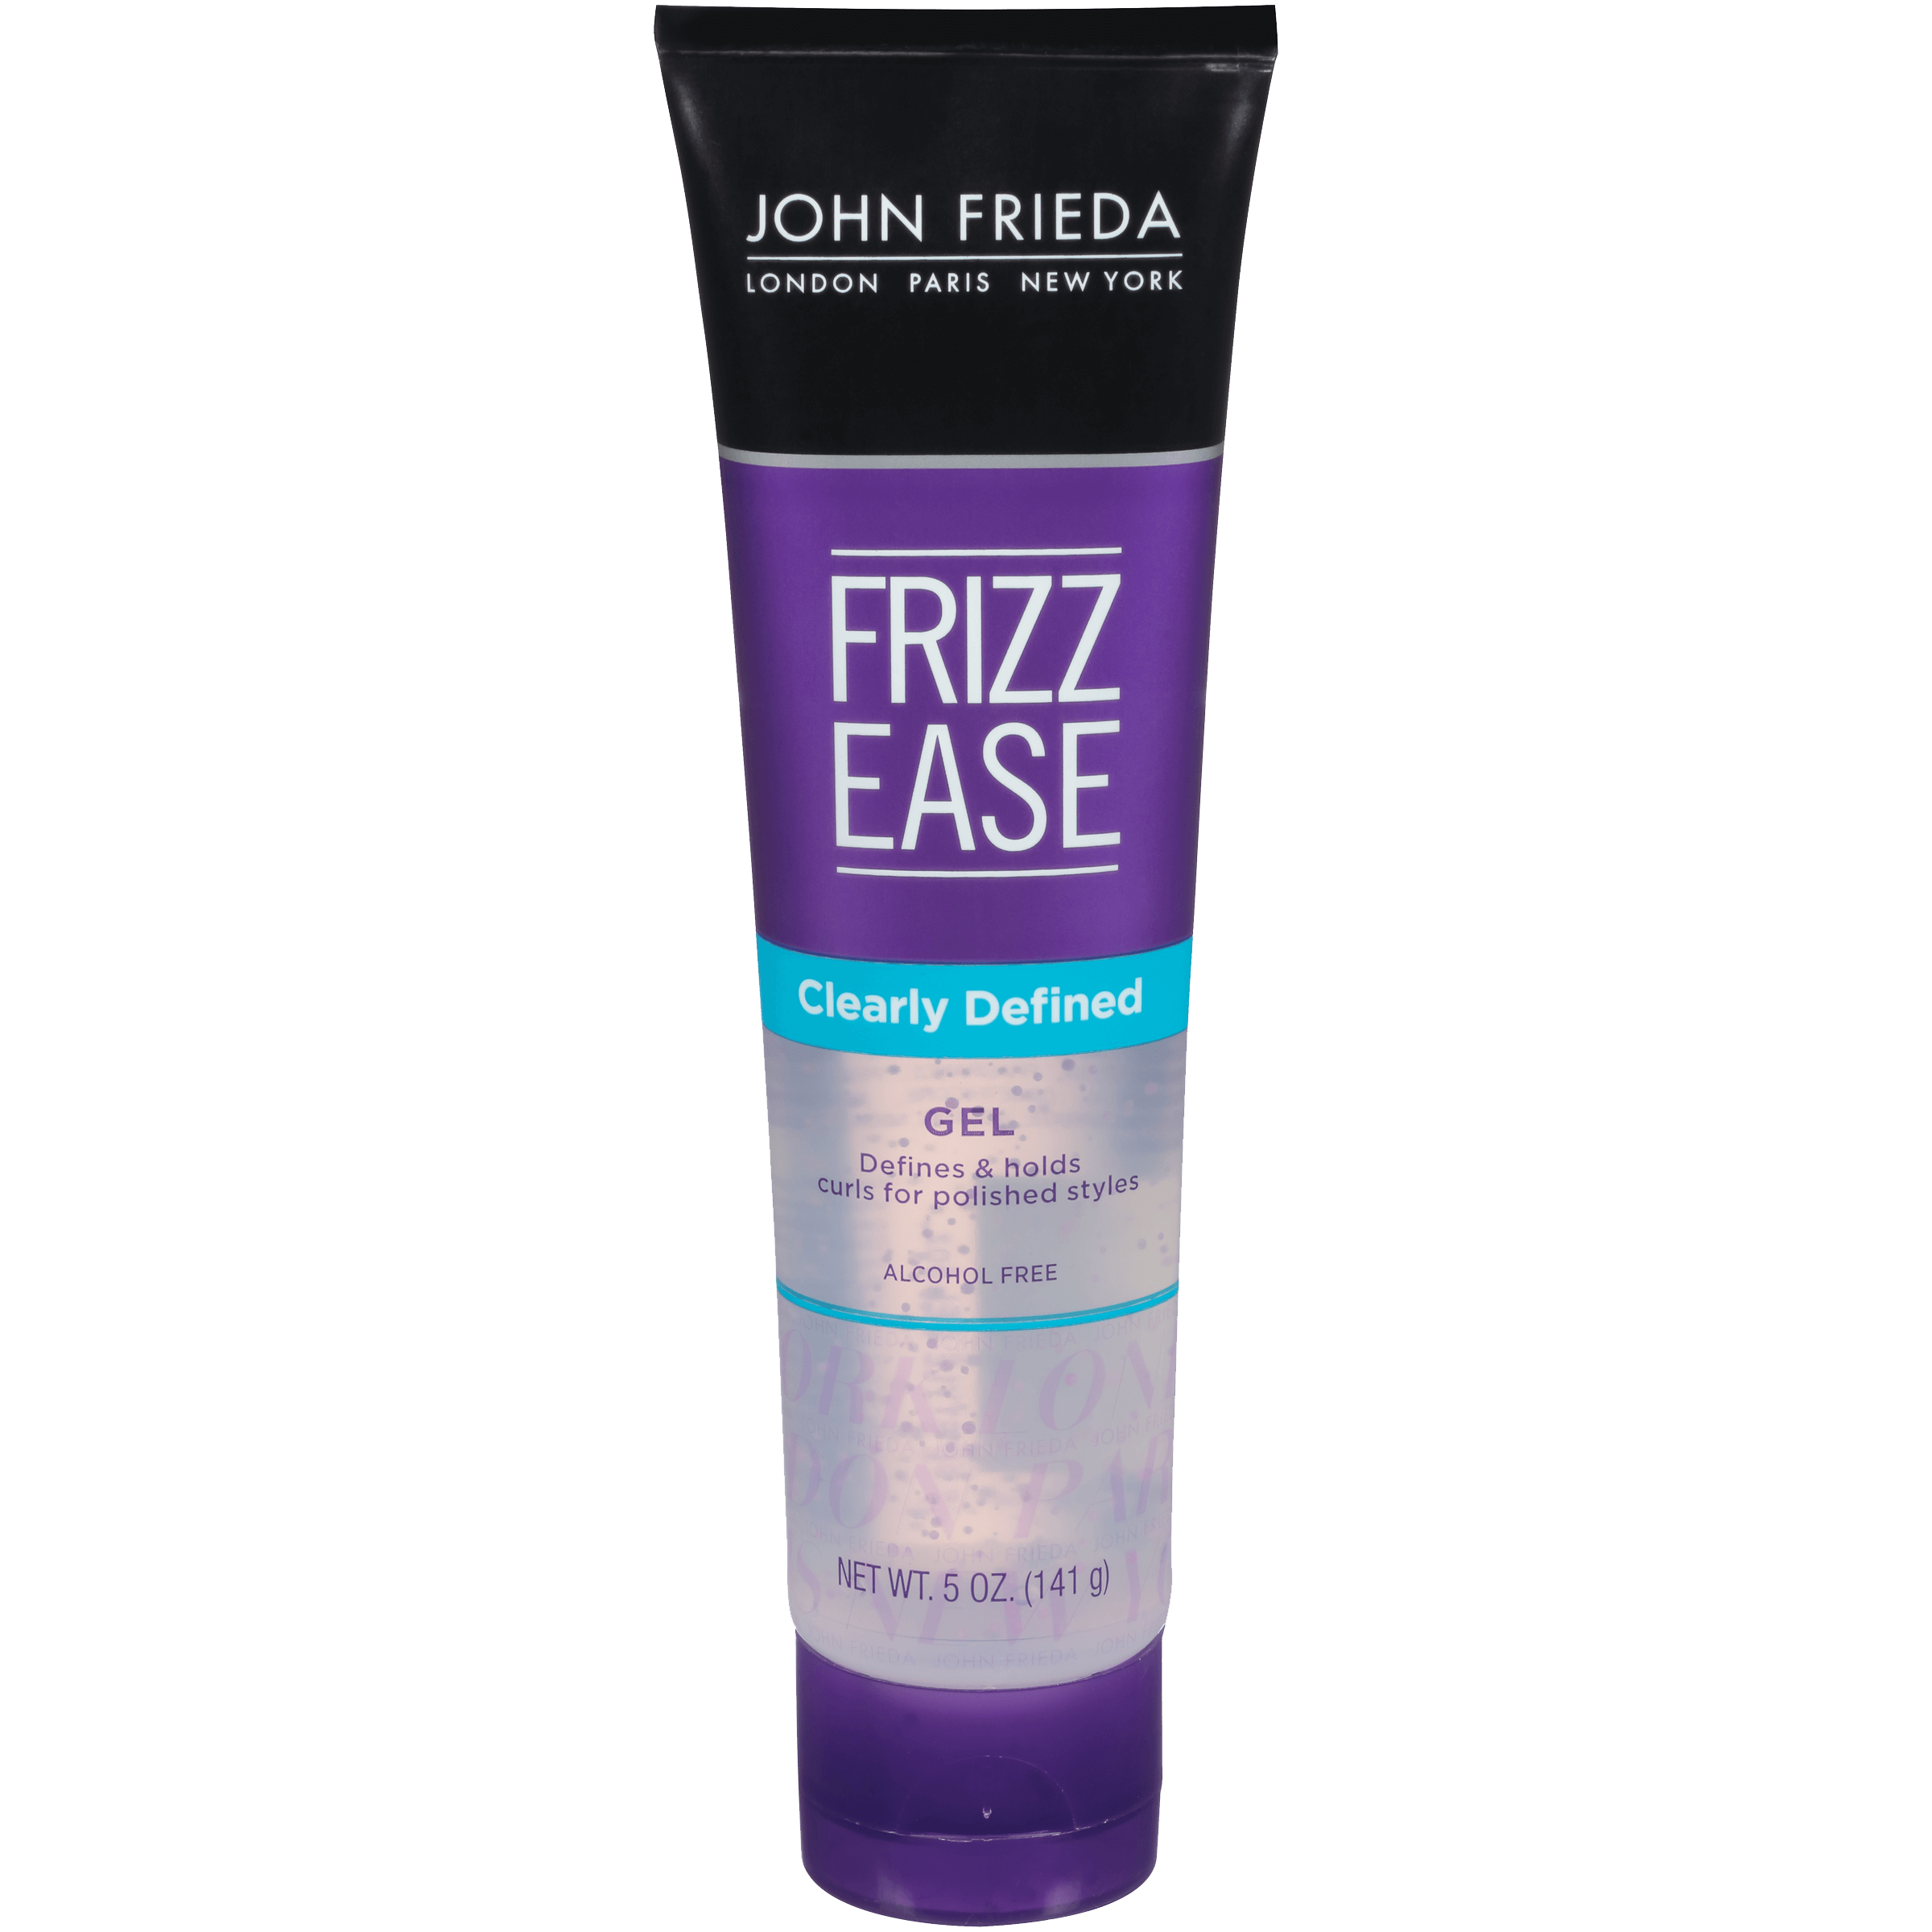 FRIZZ EASE CLEARLY DEFINED